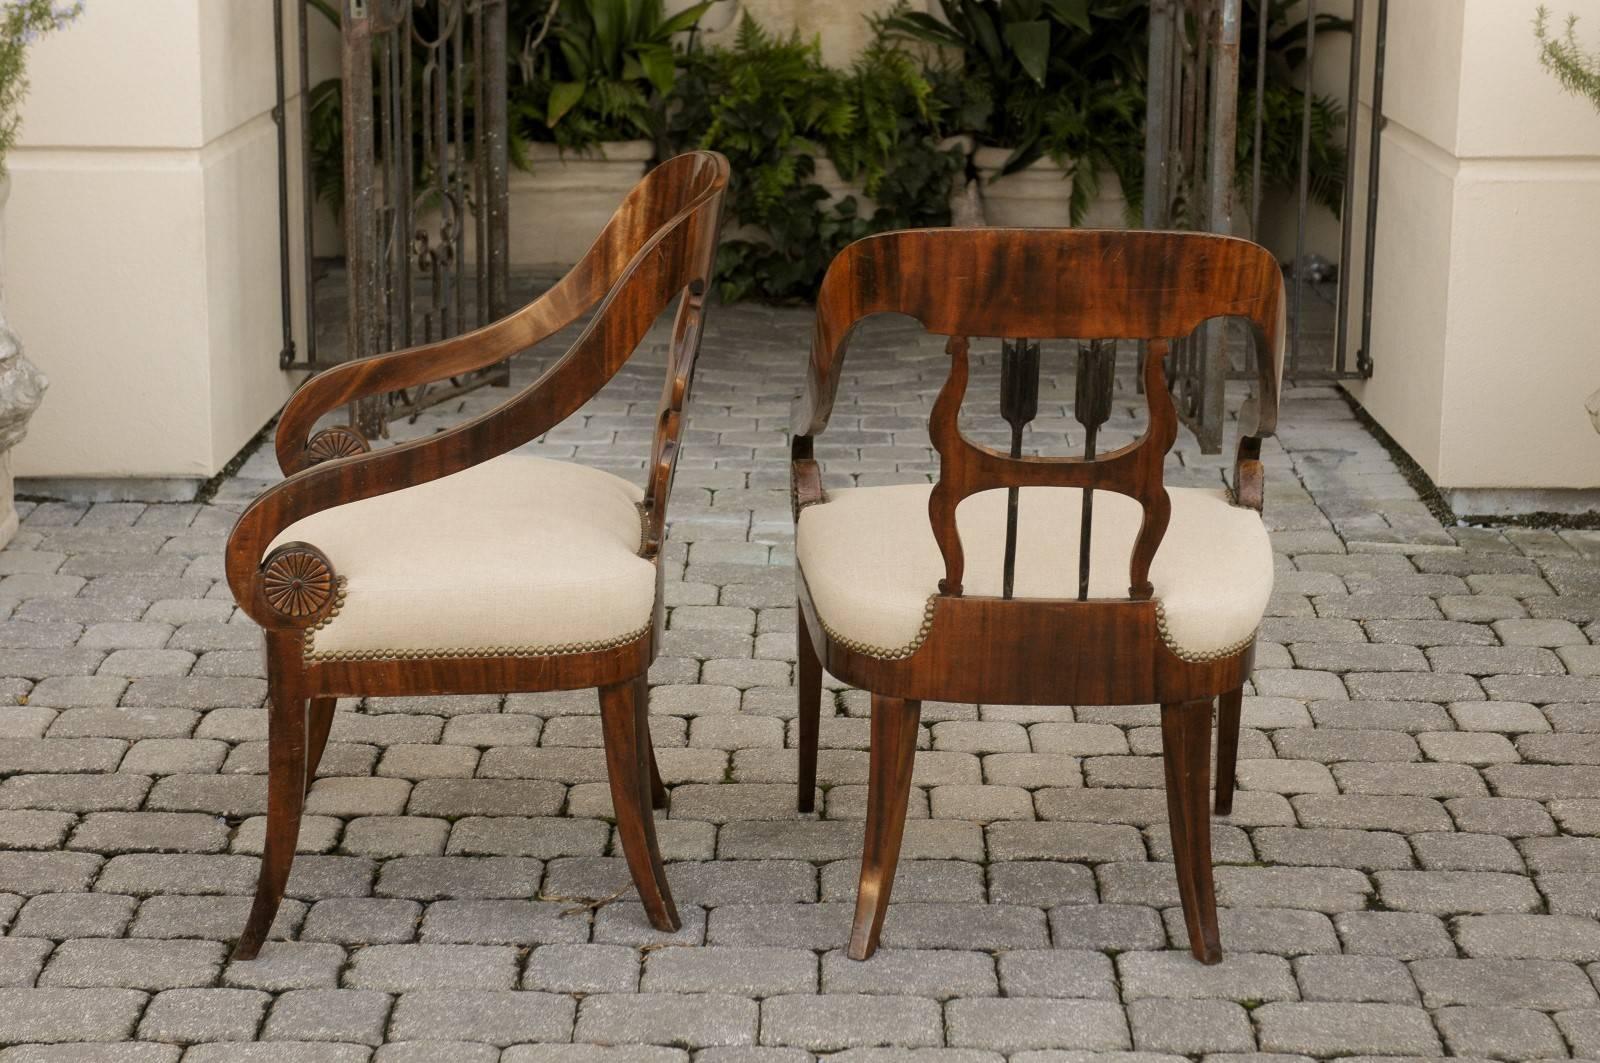 Upholstery Pair of Austrian 1860s Biedermeier Armchairs with Arrow Motifs and Scrolled Arms